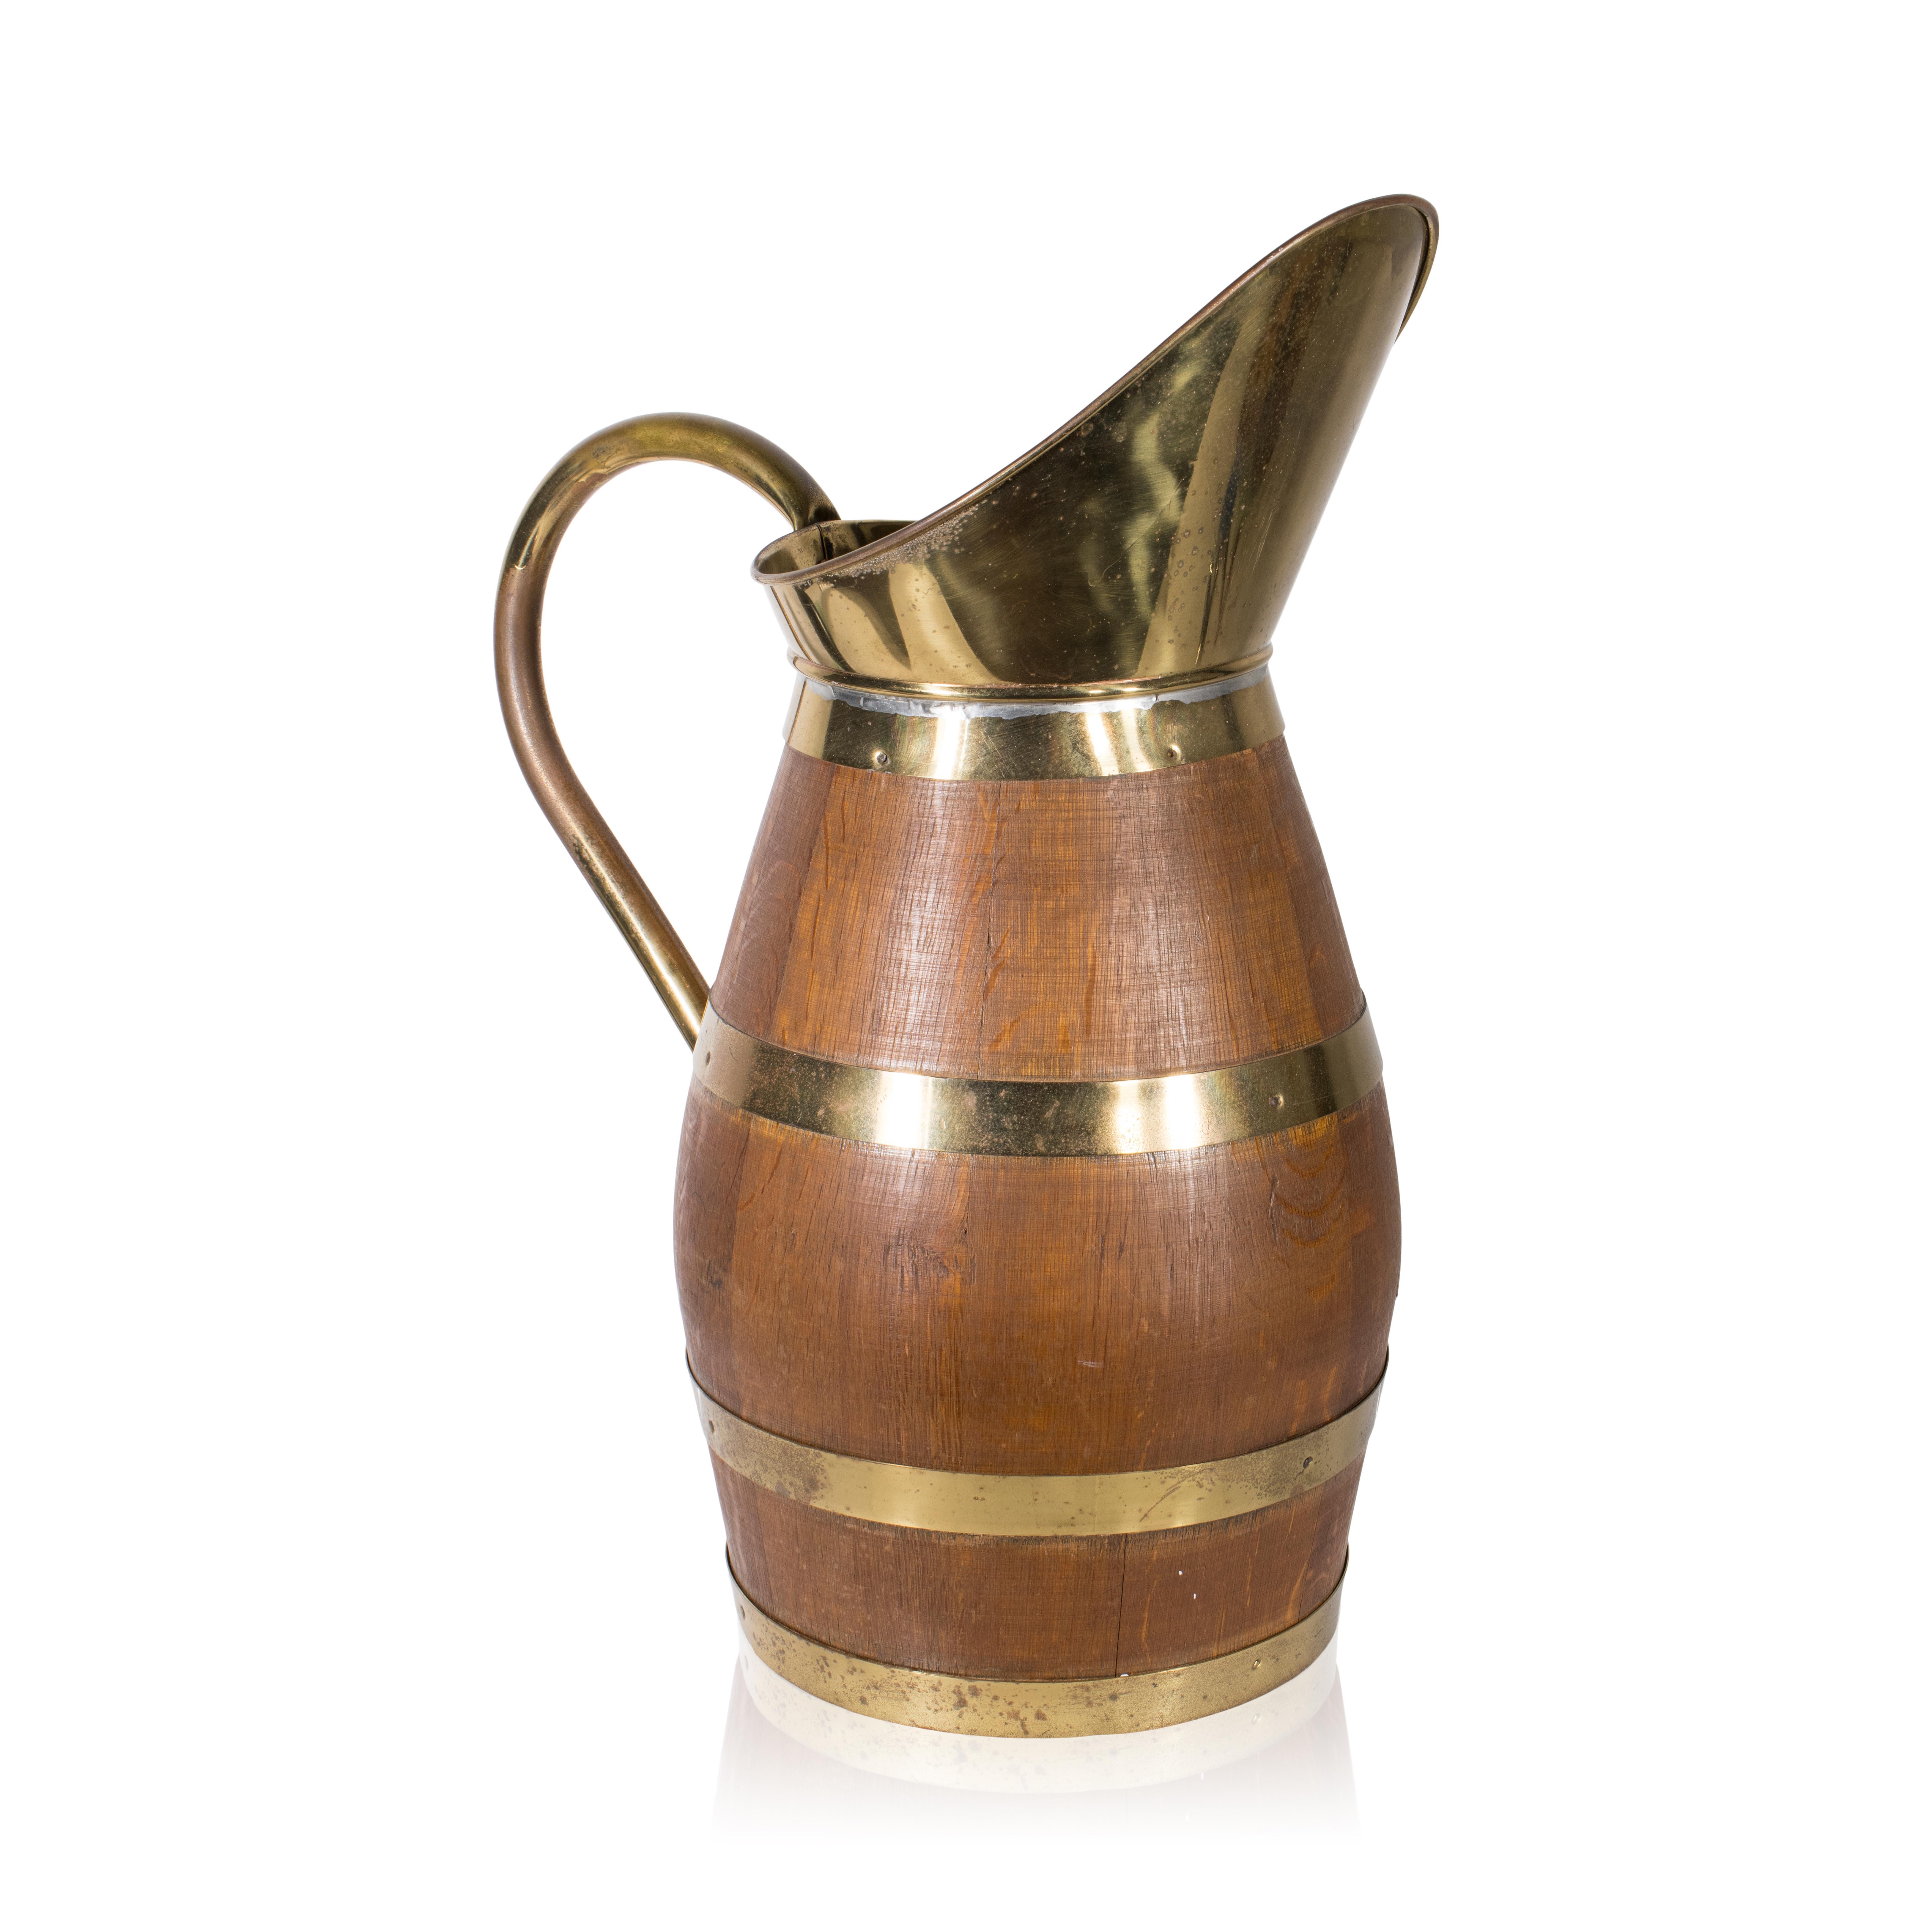 Mid 20th Century French Alascian wood and iron banded wine pitcher in large scale with handle. A great barware piece!

Period: Mid 20th century
Origin: France
Size: 21 1/2